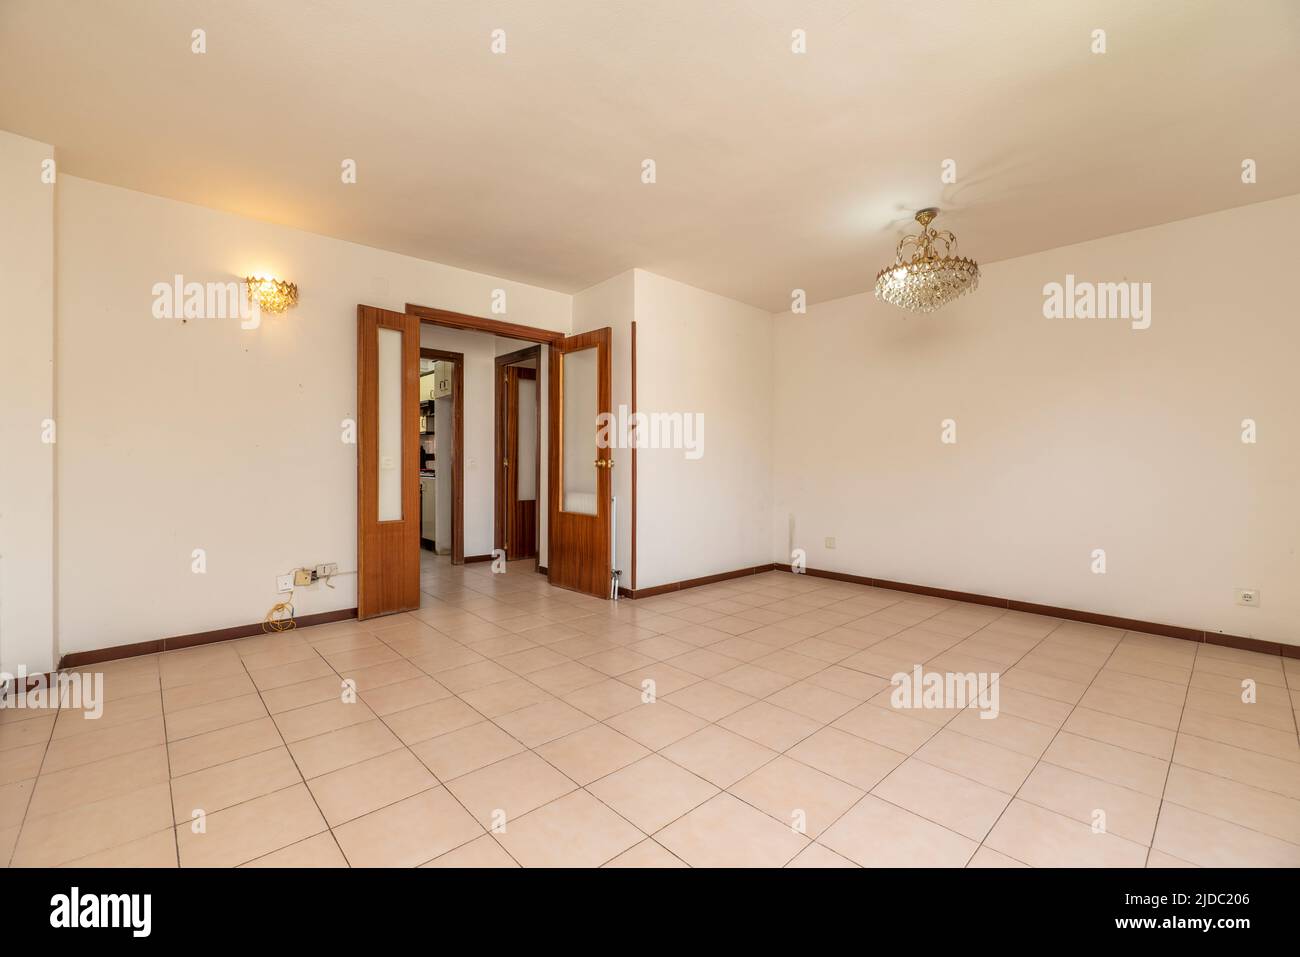 An empty living room with white painted walls, cream stoneware floor, wooden carpentry and glass lamps Stock Photo